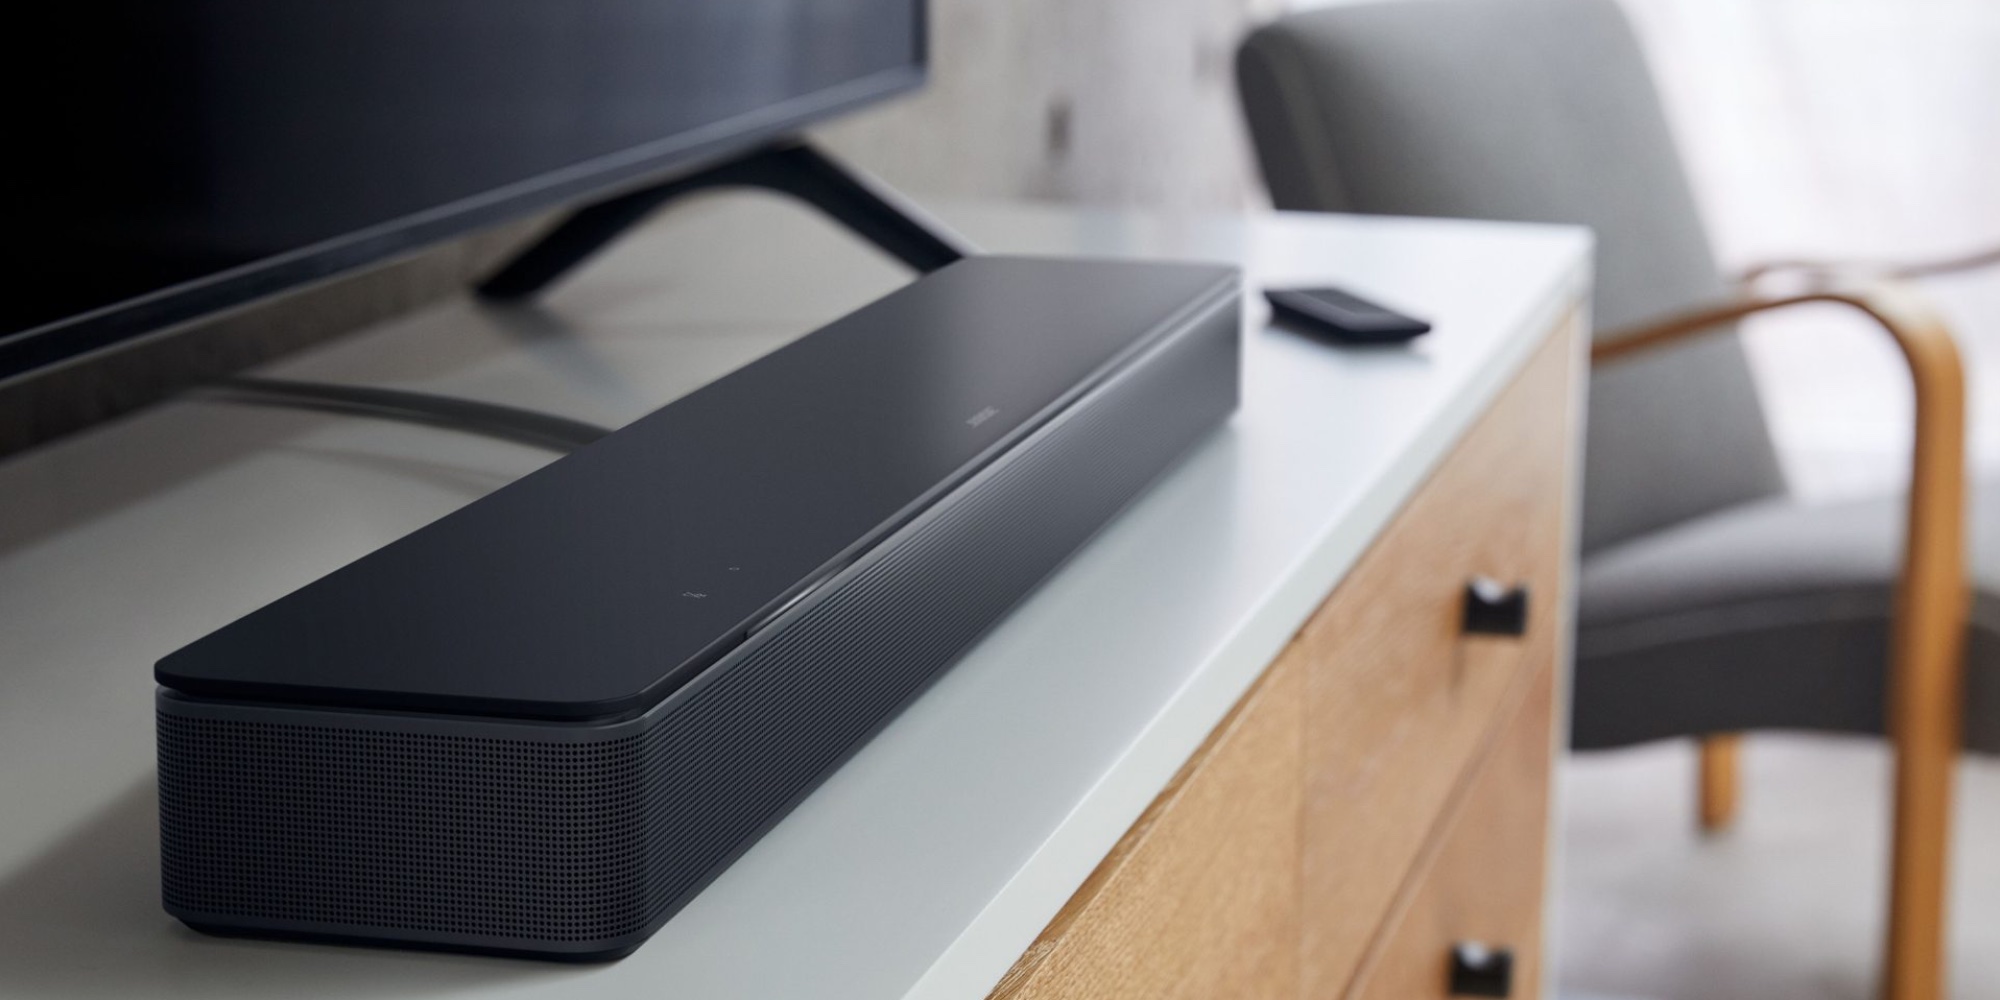 Soundbar debuts with AirPlay 2, voice control, 9to5Toys